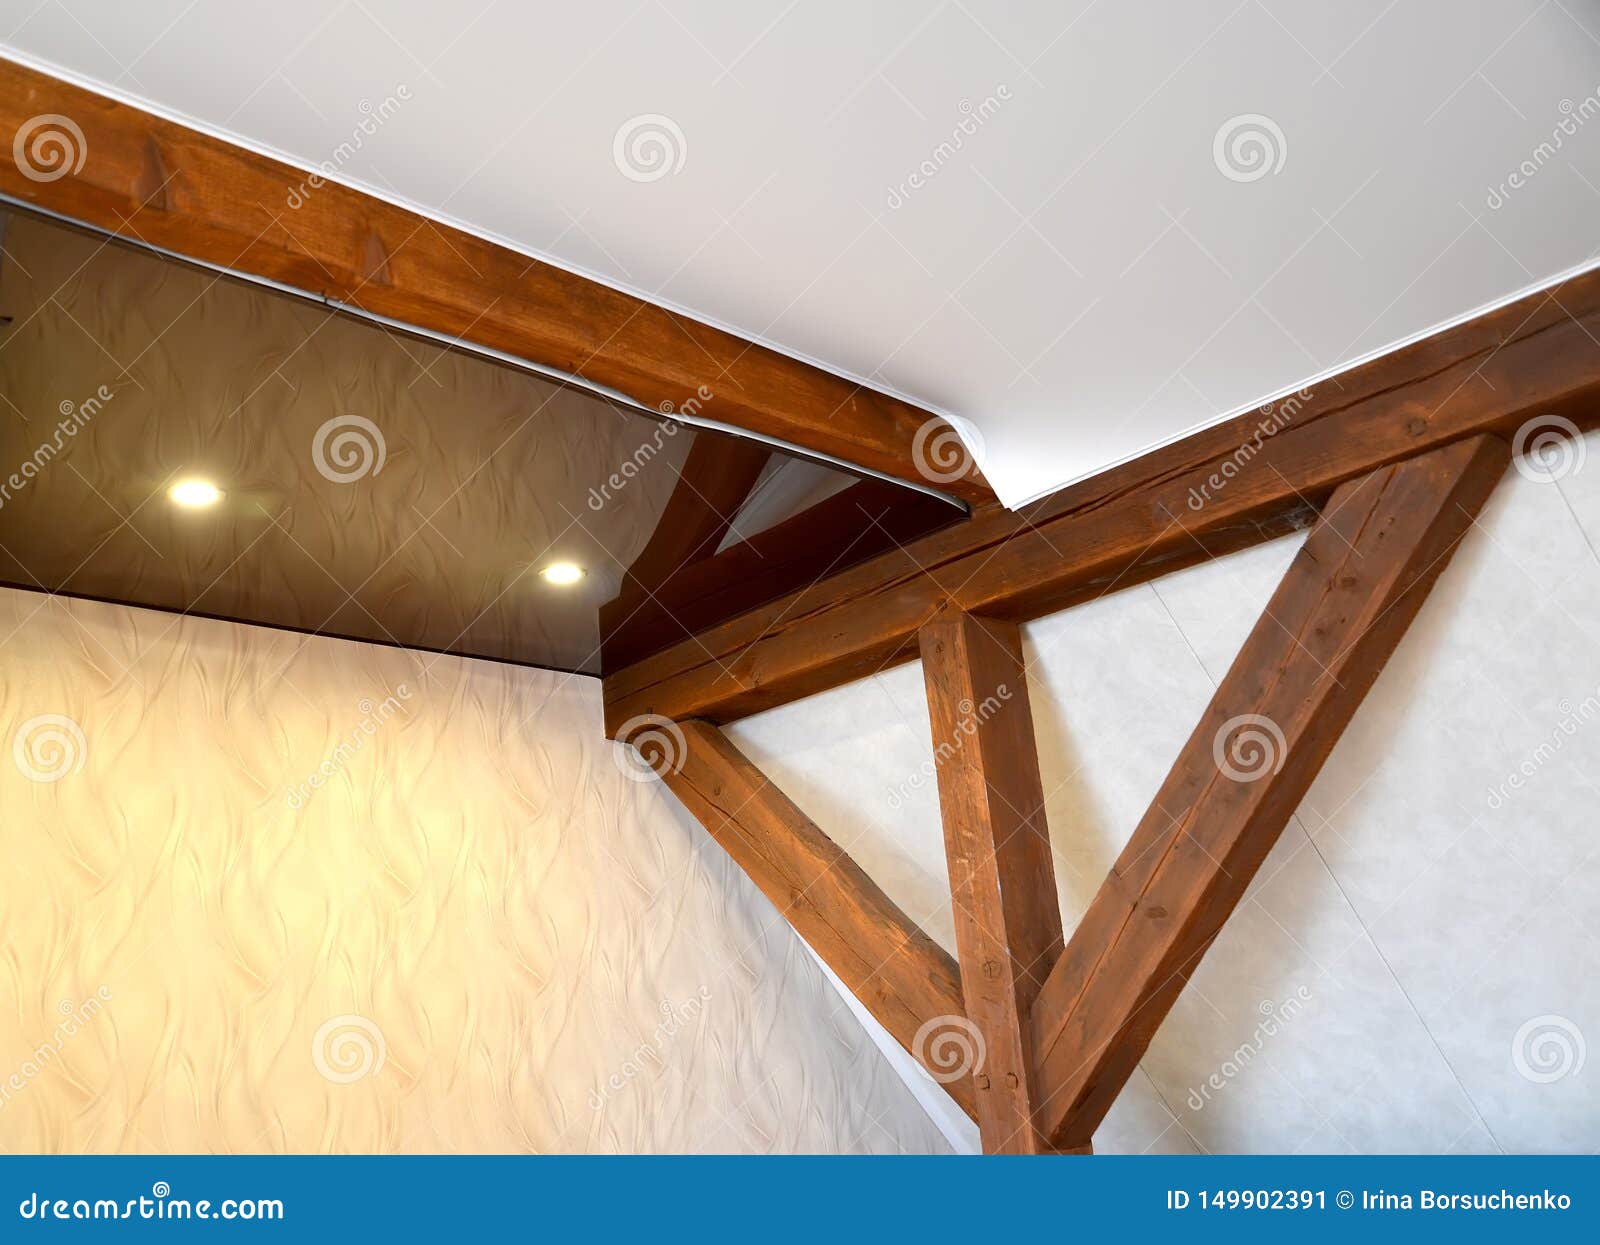 Premises Corner With A Box Of A Stretch Ceiling And Wooden Beams